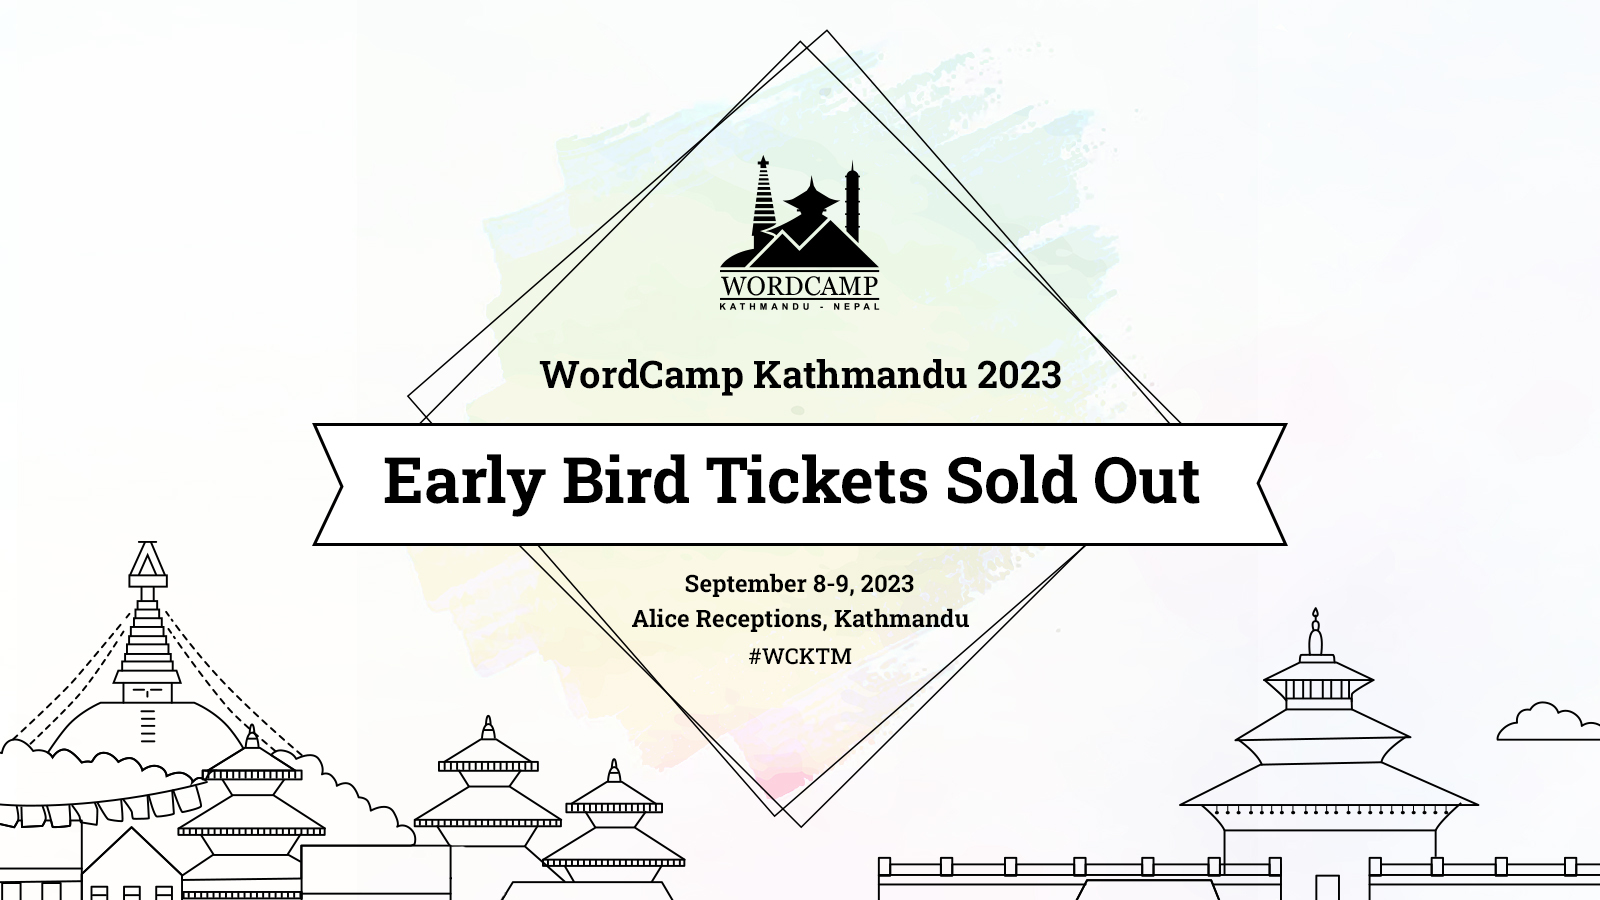 Early bird ticket for WordCamp Kathmandu 2023 sold out